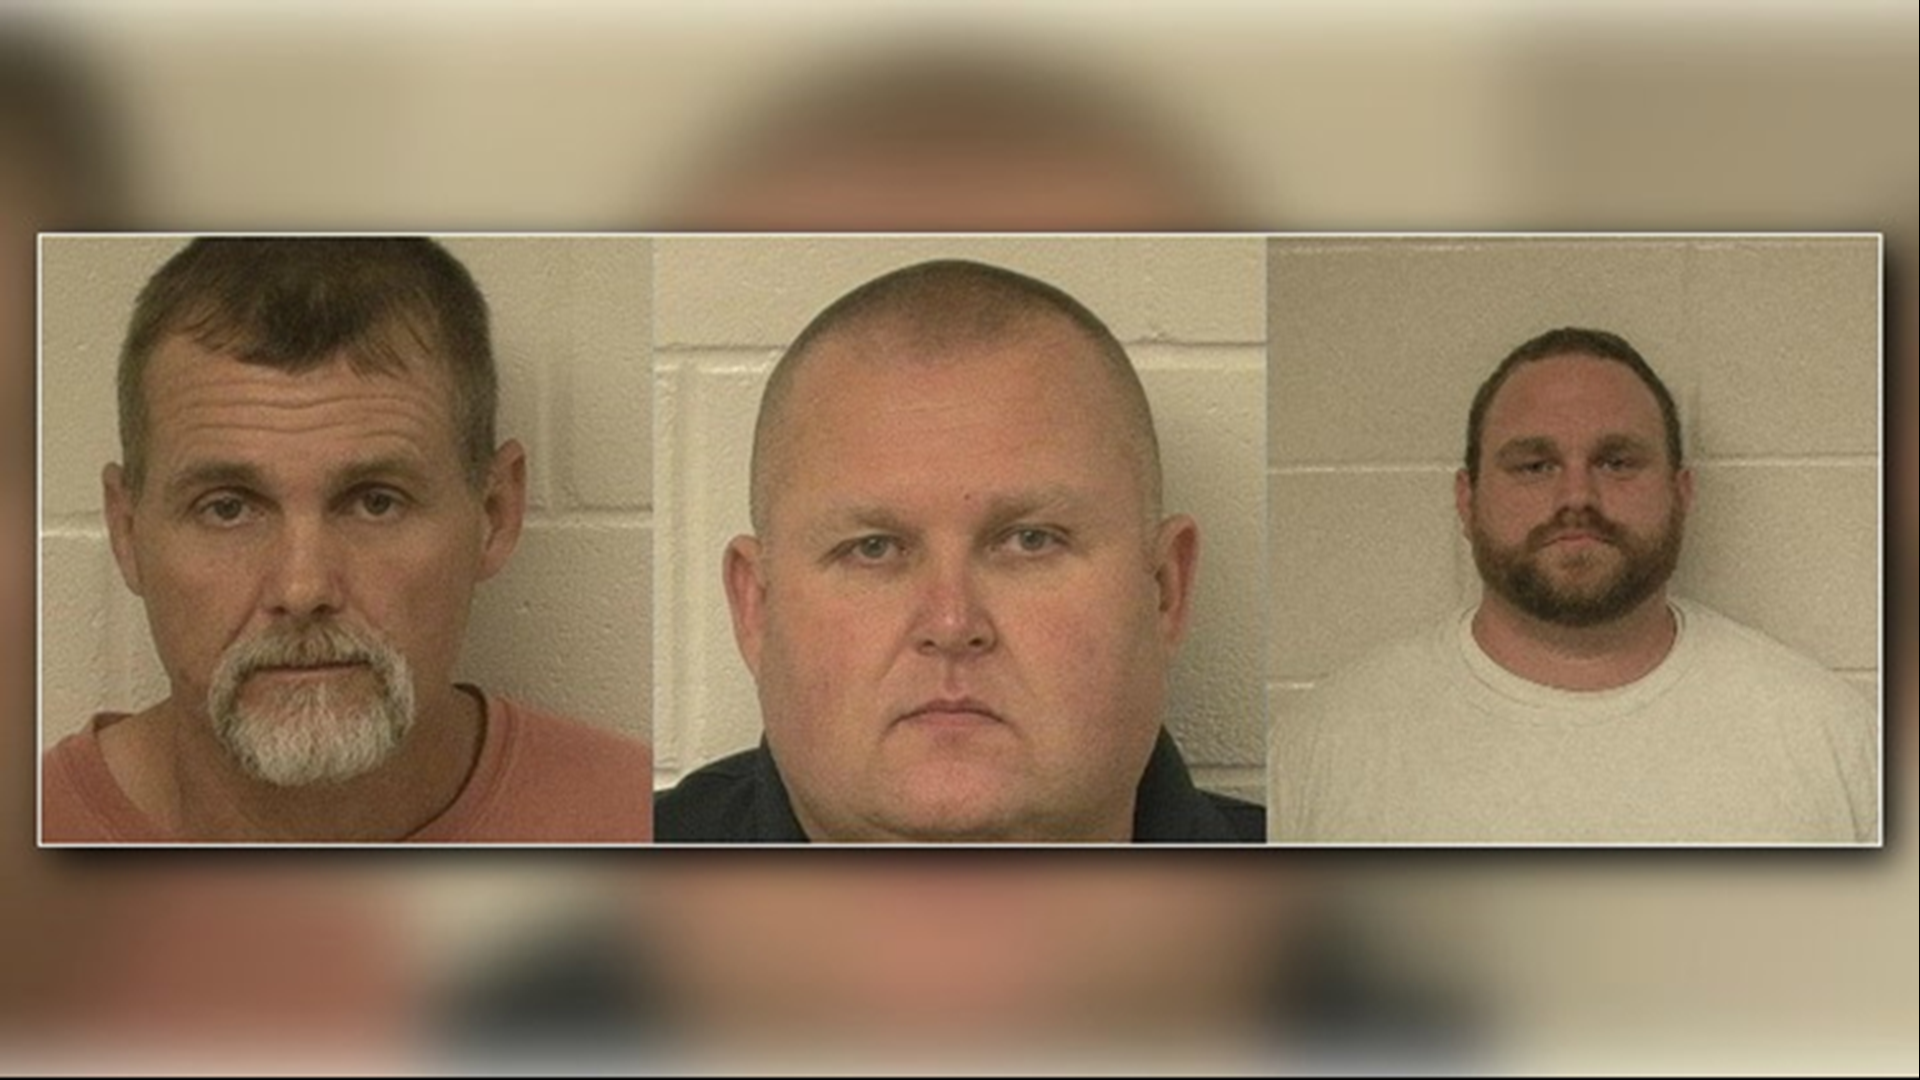 The murder trial for three Washington County deputies accused of fatally tasing a man in 2017 is scheduled to begin Oct. 8, 2021